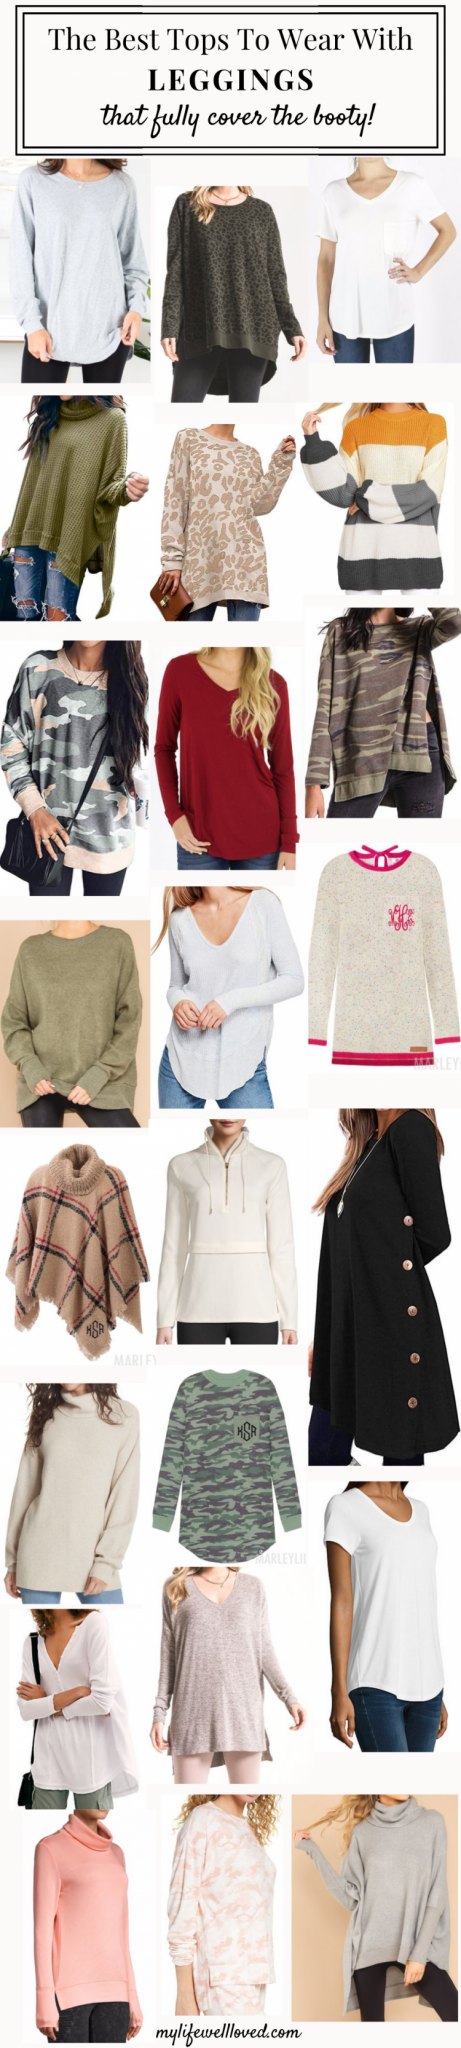 Tops to Wear with Leggings